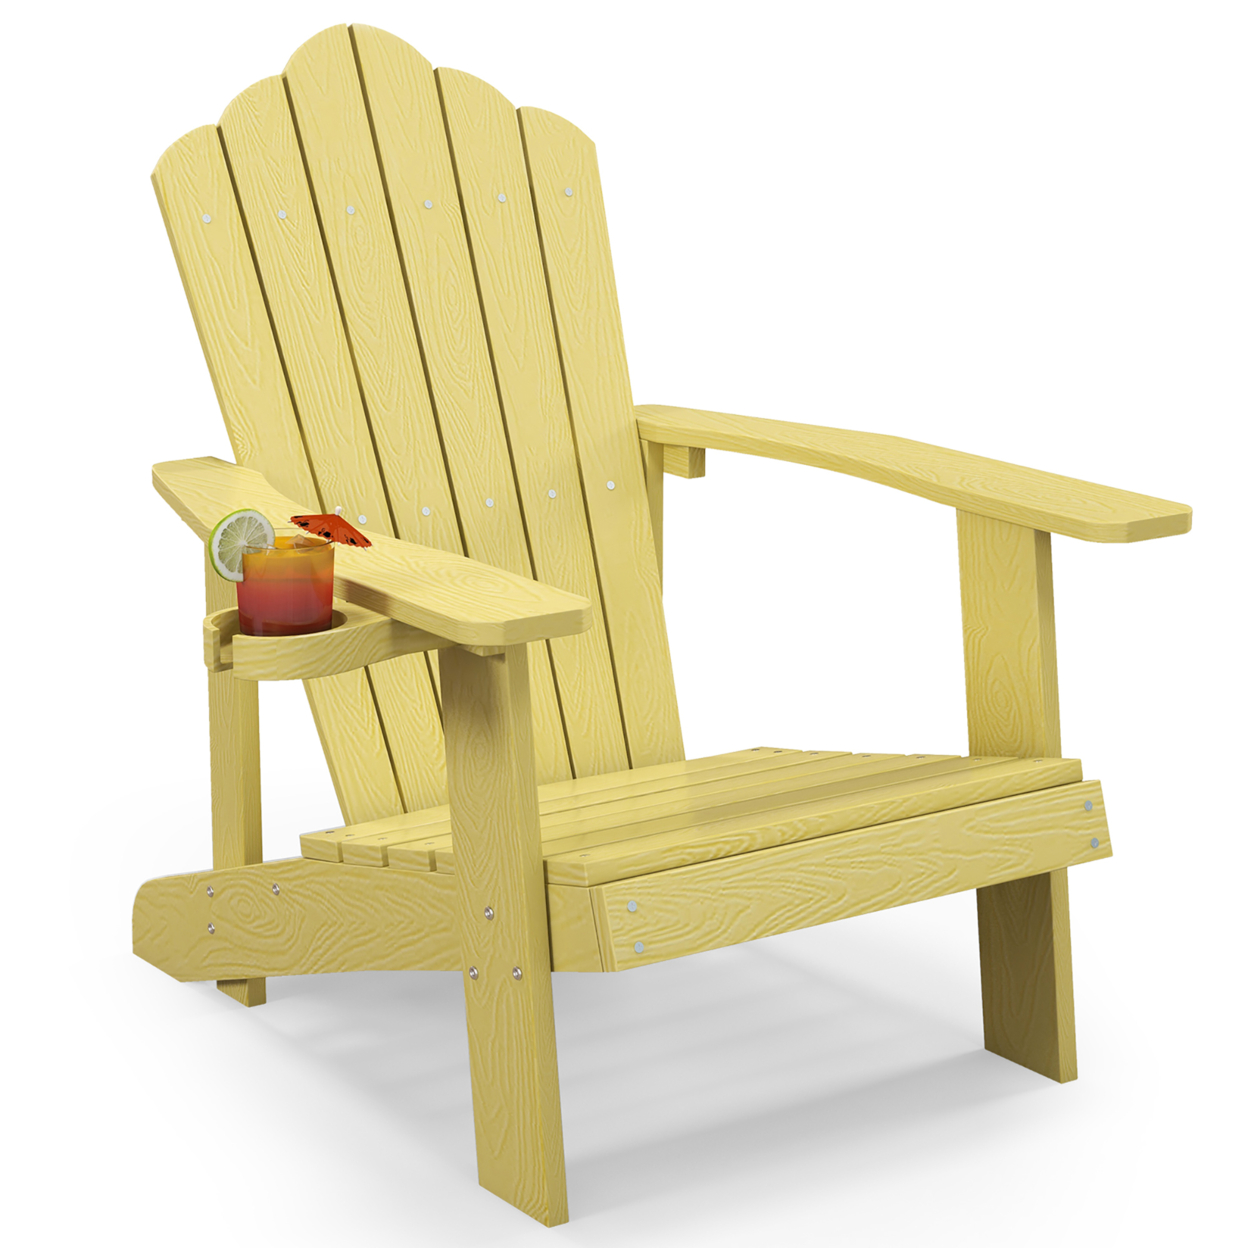 Patio HIPS Outdoor Weather Resistant Slatted Chair Adirondack Chair W/ Cup Holder - Yellow